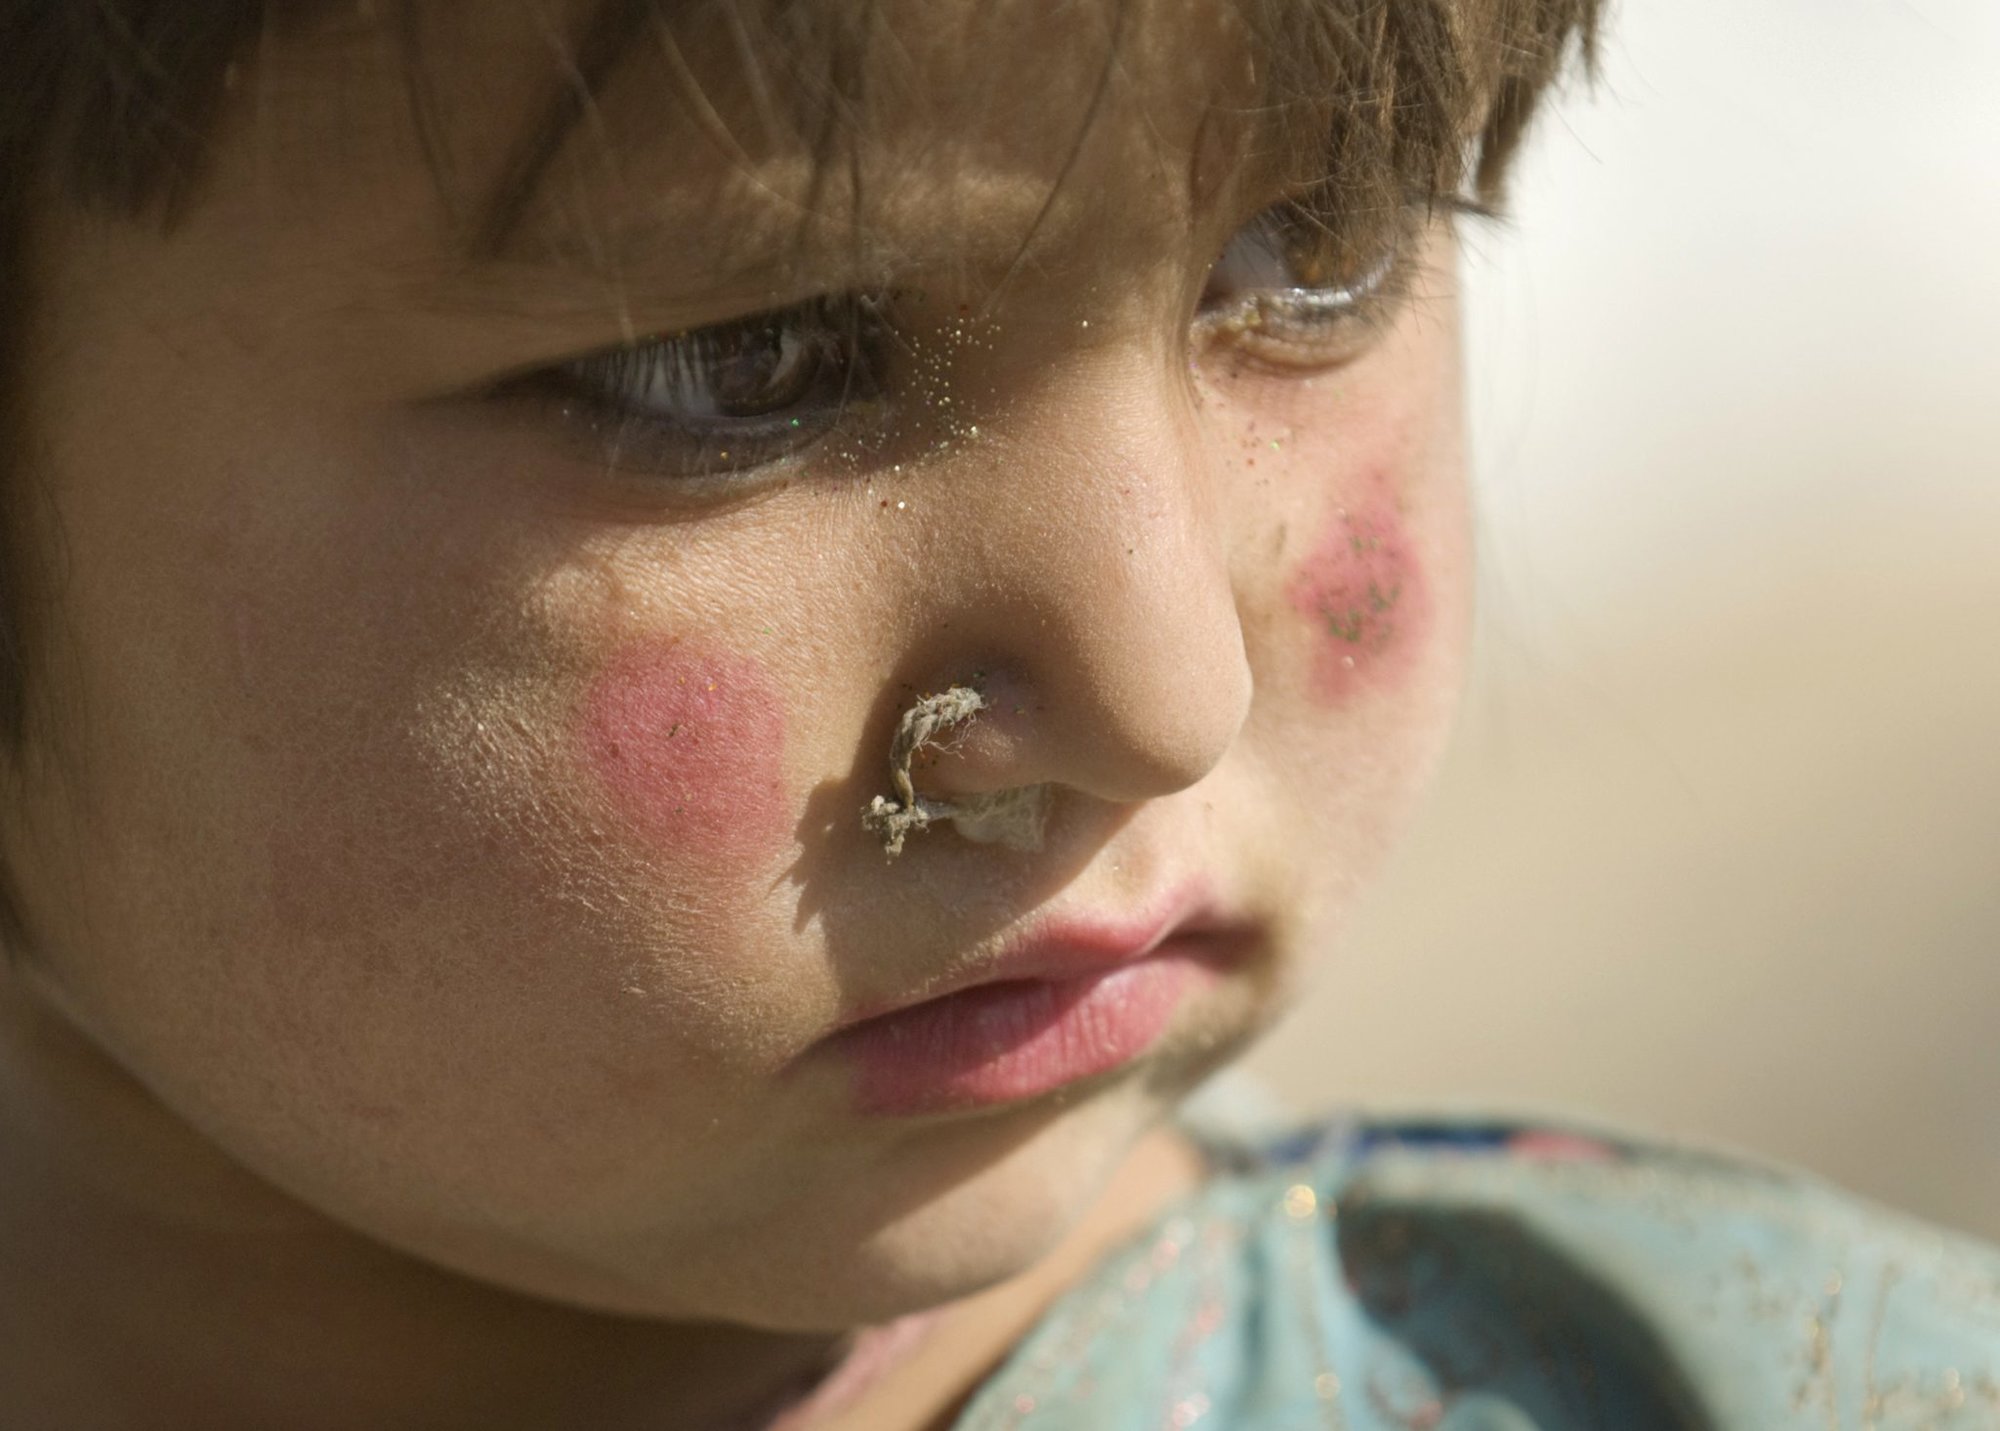 An Afghan girl waits to receive shoes and clothes during a humanitarian assistance visit to the Parwan Refugee Camp in Afghanistan in 2008. US Air Force photo by Master Sgt. Keith Brown.